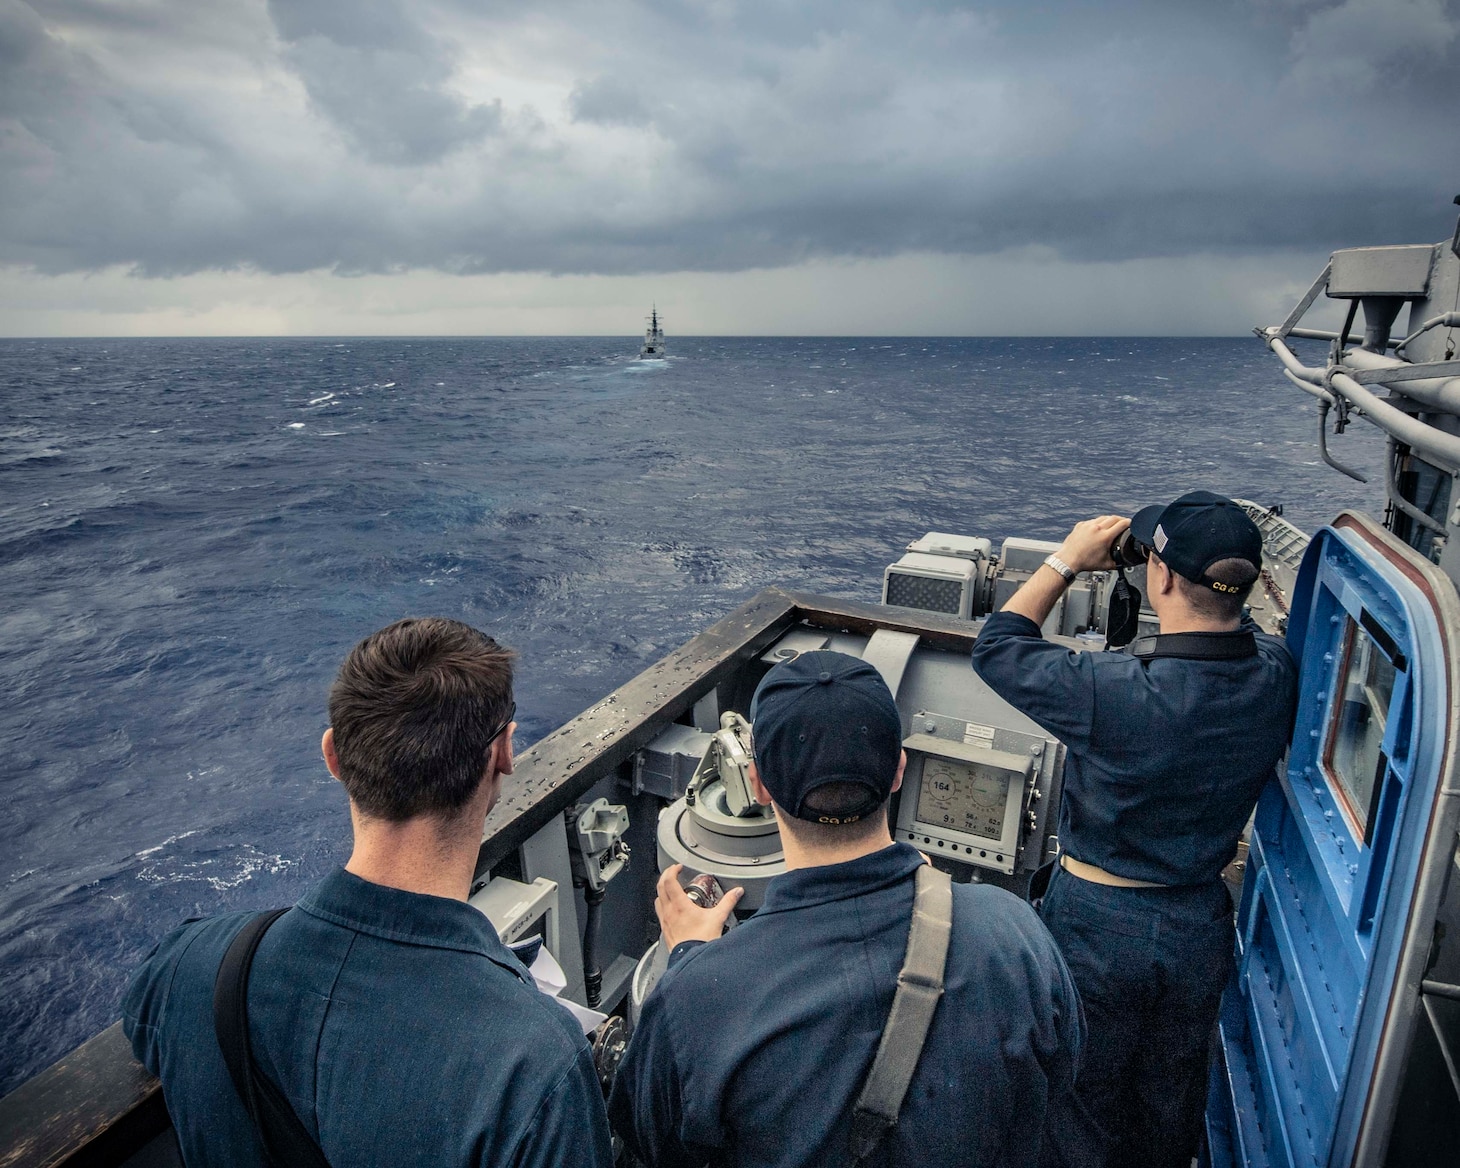 PHILIPPINE SEA (Nov. 21, 2019) Sailors stand watch on the bridge of the Ticonderoga-class guided-missile cruiser USS Chancellorsville (CG 62) as the ship maneuvers behind the Royal Australian navy ship HMAS Hobart (DDG 39) during a group maneuvering exercise with ships from the Royal Australian Navy, Royal Canadian Navy, and Republic of Korea Navy as part of Pacific Vanguard 2019. Chancellorsville is forward-deployed to the U.S. 7th Fleet area of operations in support of security and stability in the Indo-Pacific region.